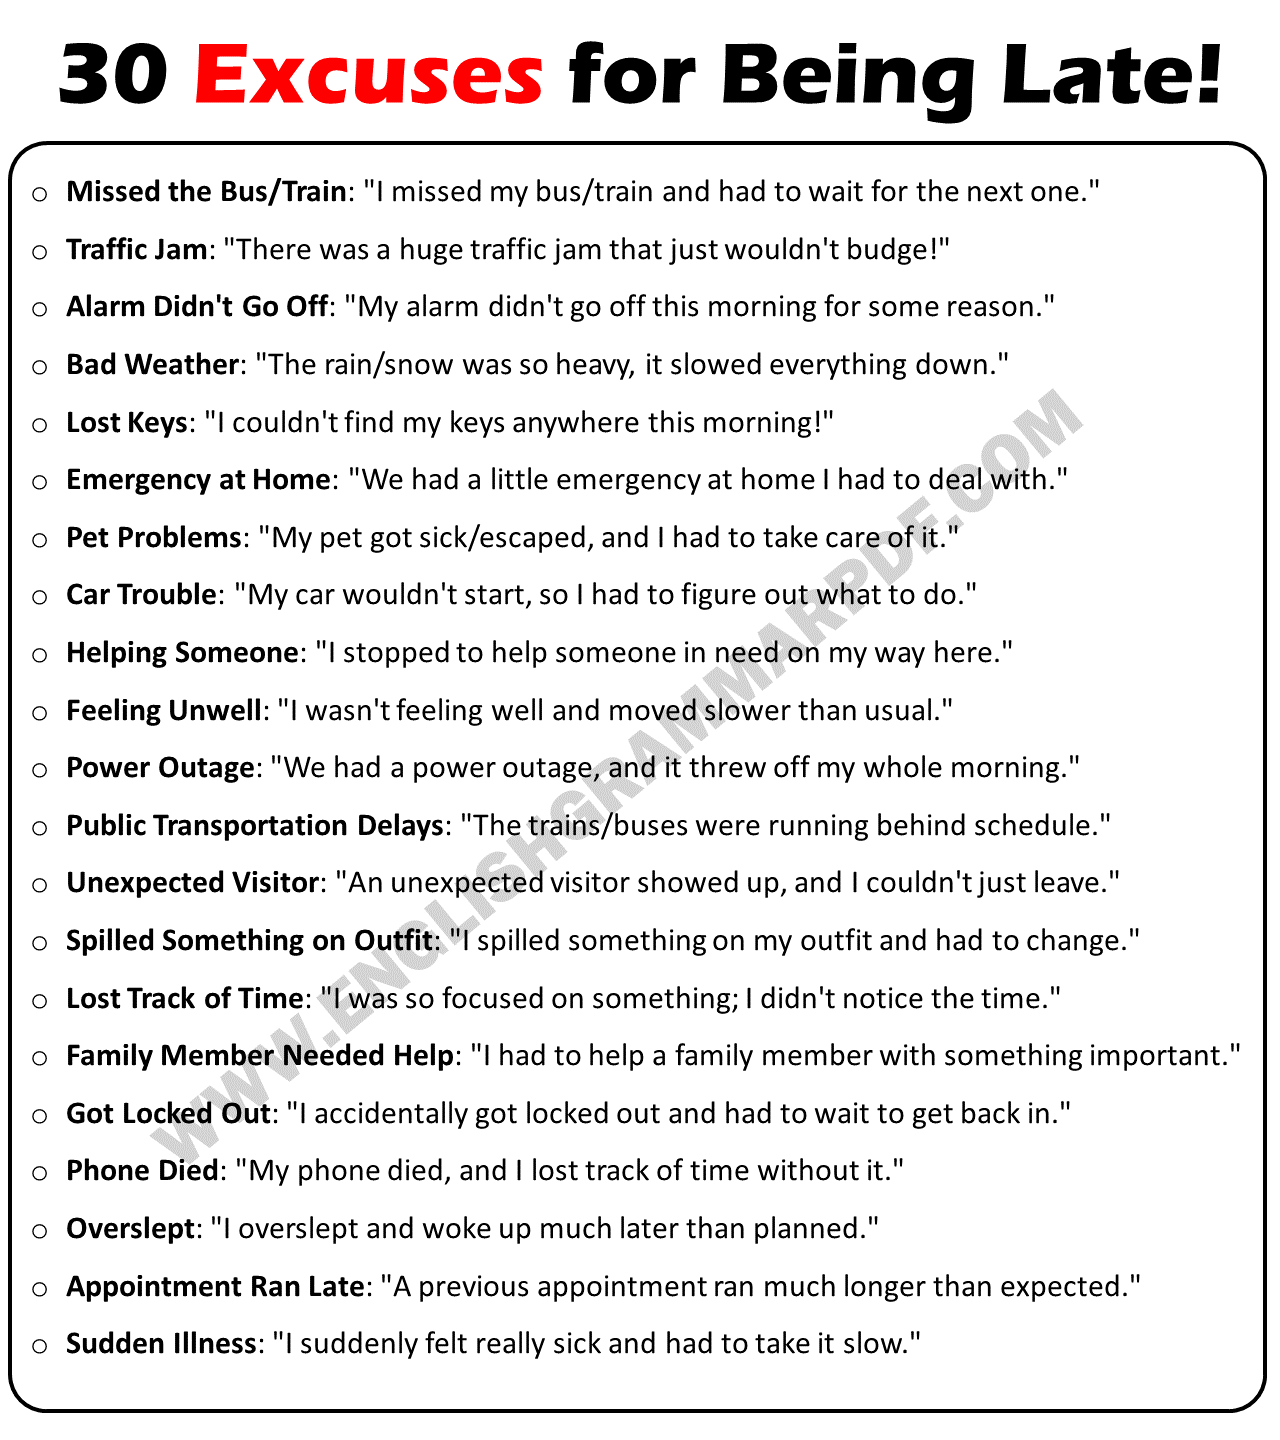 30 Excuses for Being Late!